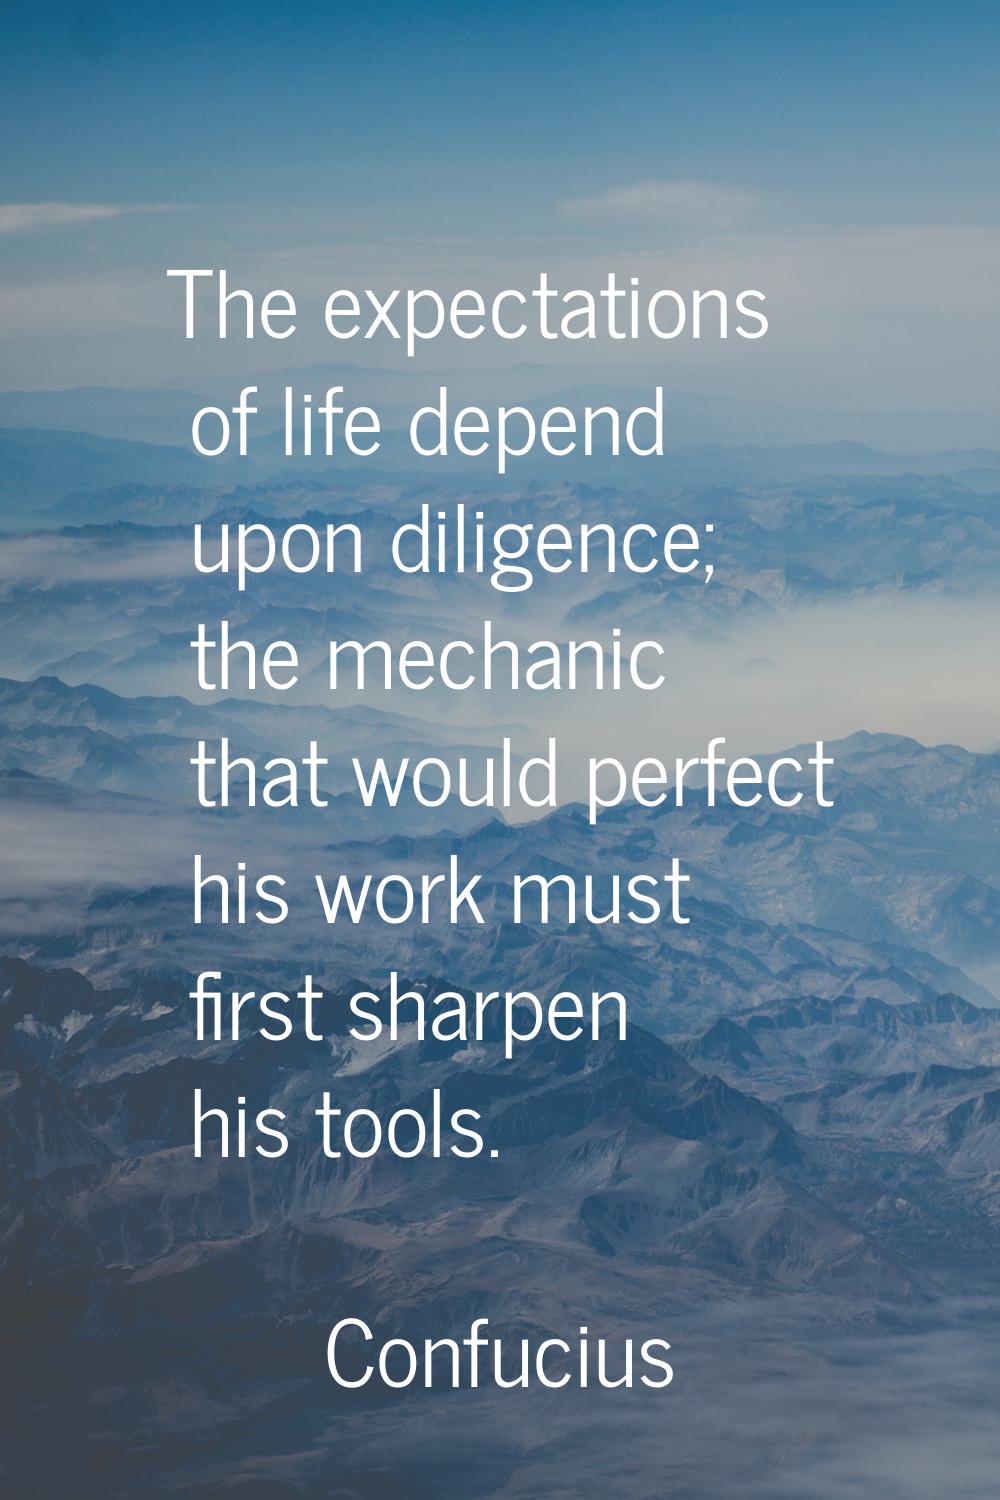 The expectations of life depend upon diligence; the mechanic that would perfect his work must first